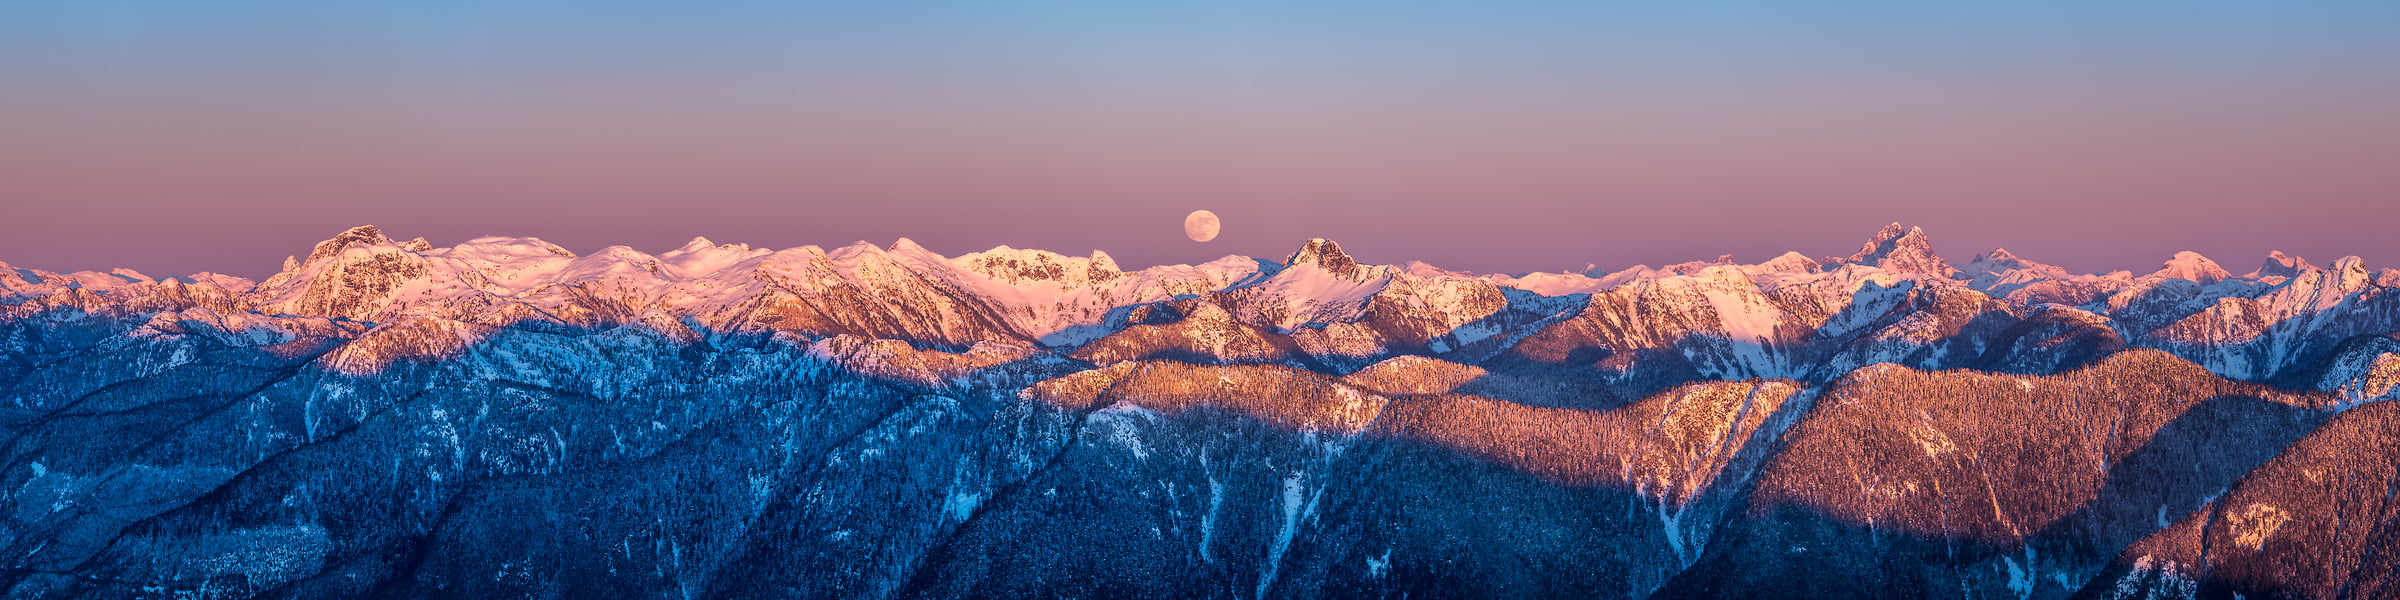 169 megapixels! A very high resolution, large-format VAST photo print of mountains, sunset, dusk, the moon, First Peak, and Mount Seymour Provincial Park; fine art landscape photo created by Tim Shields in Vancouver, British Columbia